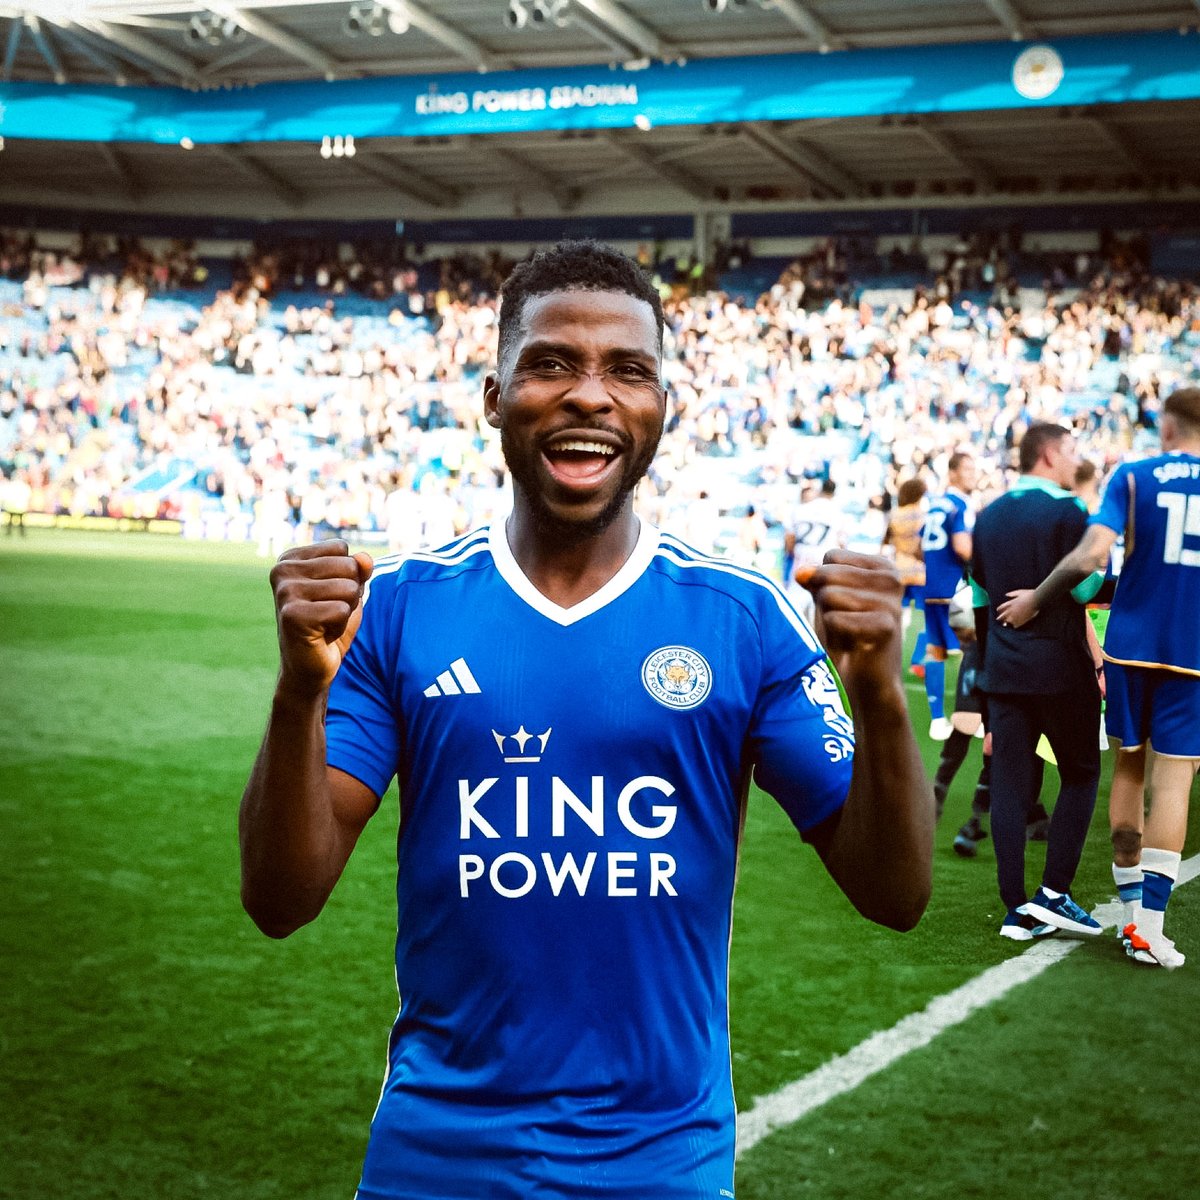 Congratulations to the duo of Wilfred Ndidi and Kelechi Iheanacho who have now officially secured promotion to the Premier League with Leicester City. Back where they belong 📈